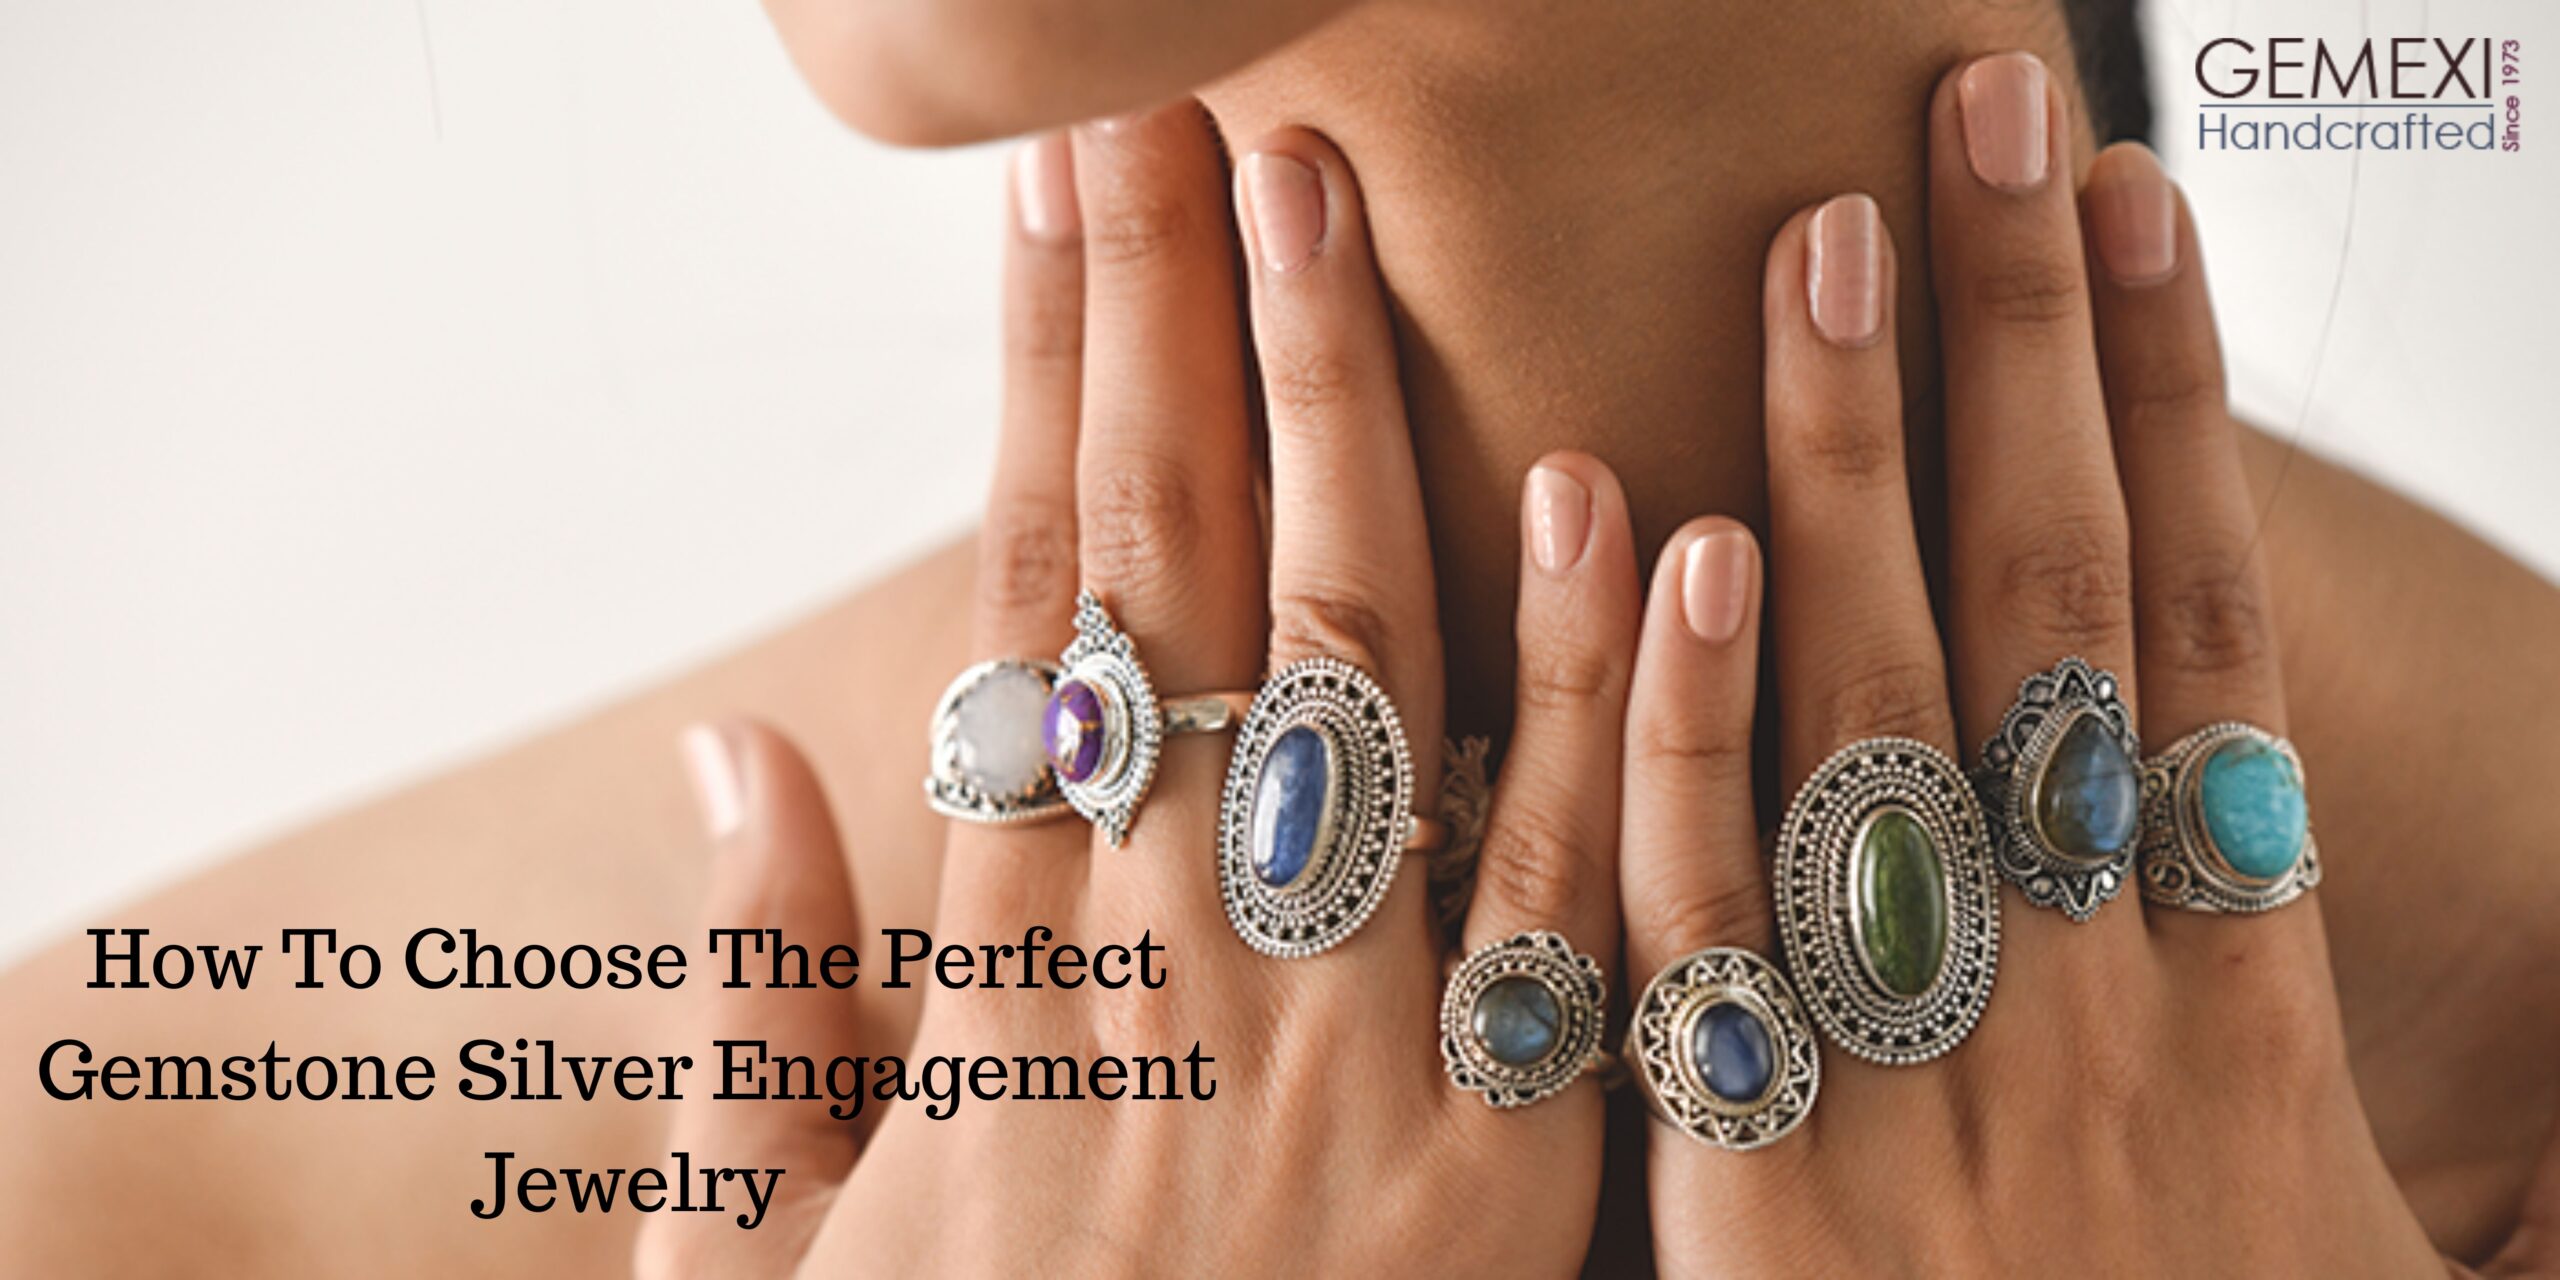 How To Choose The Perfect Gemstone Silver Engagement Jewelry